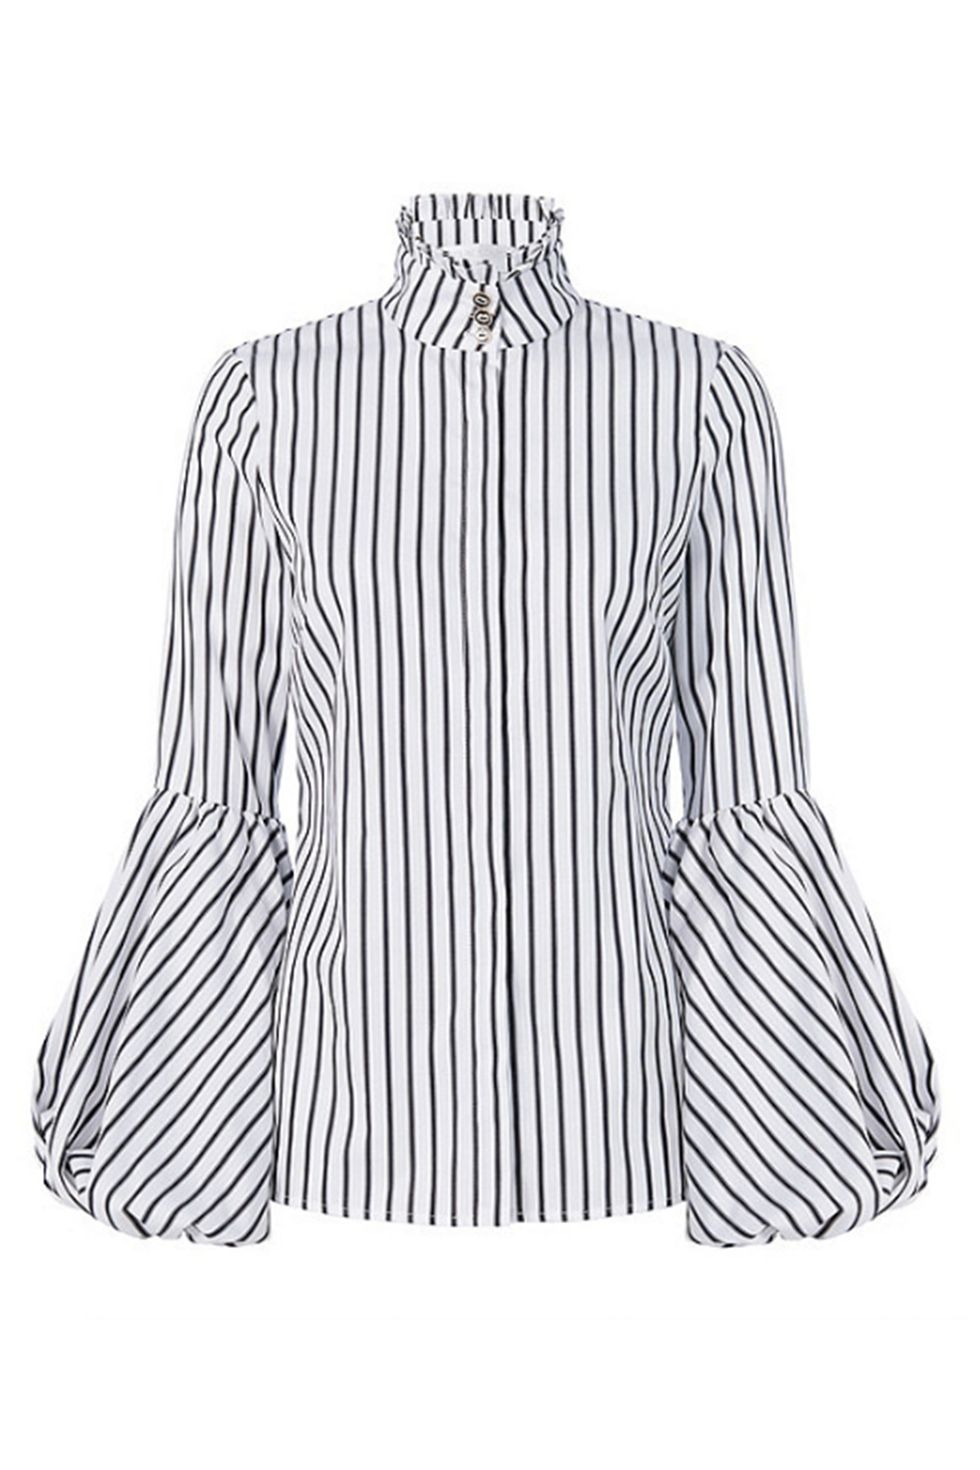 A Romantic Blouse Should Be Your Winter Wardrobe BFF